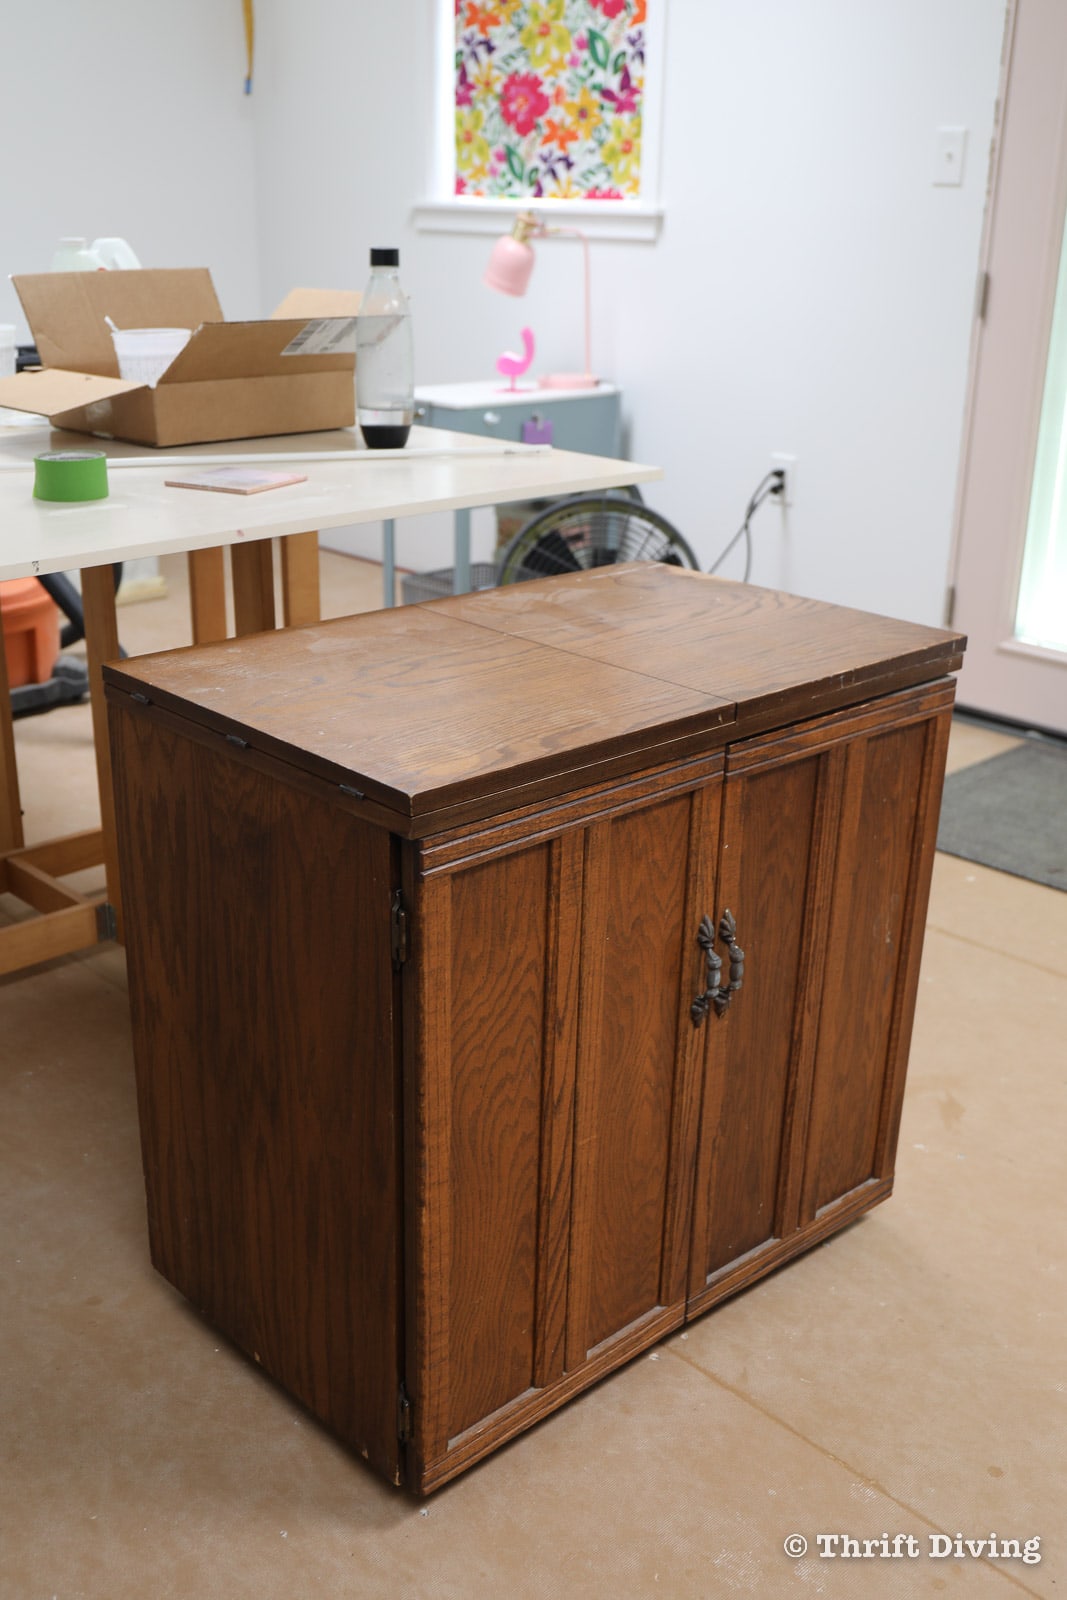 BEFORE and AFTER: Vintage Sewing Cabinet Makeover - $40 sewing cabinet is painted pink - Thrift Diving